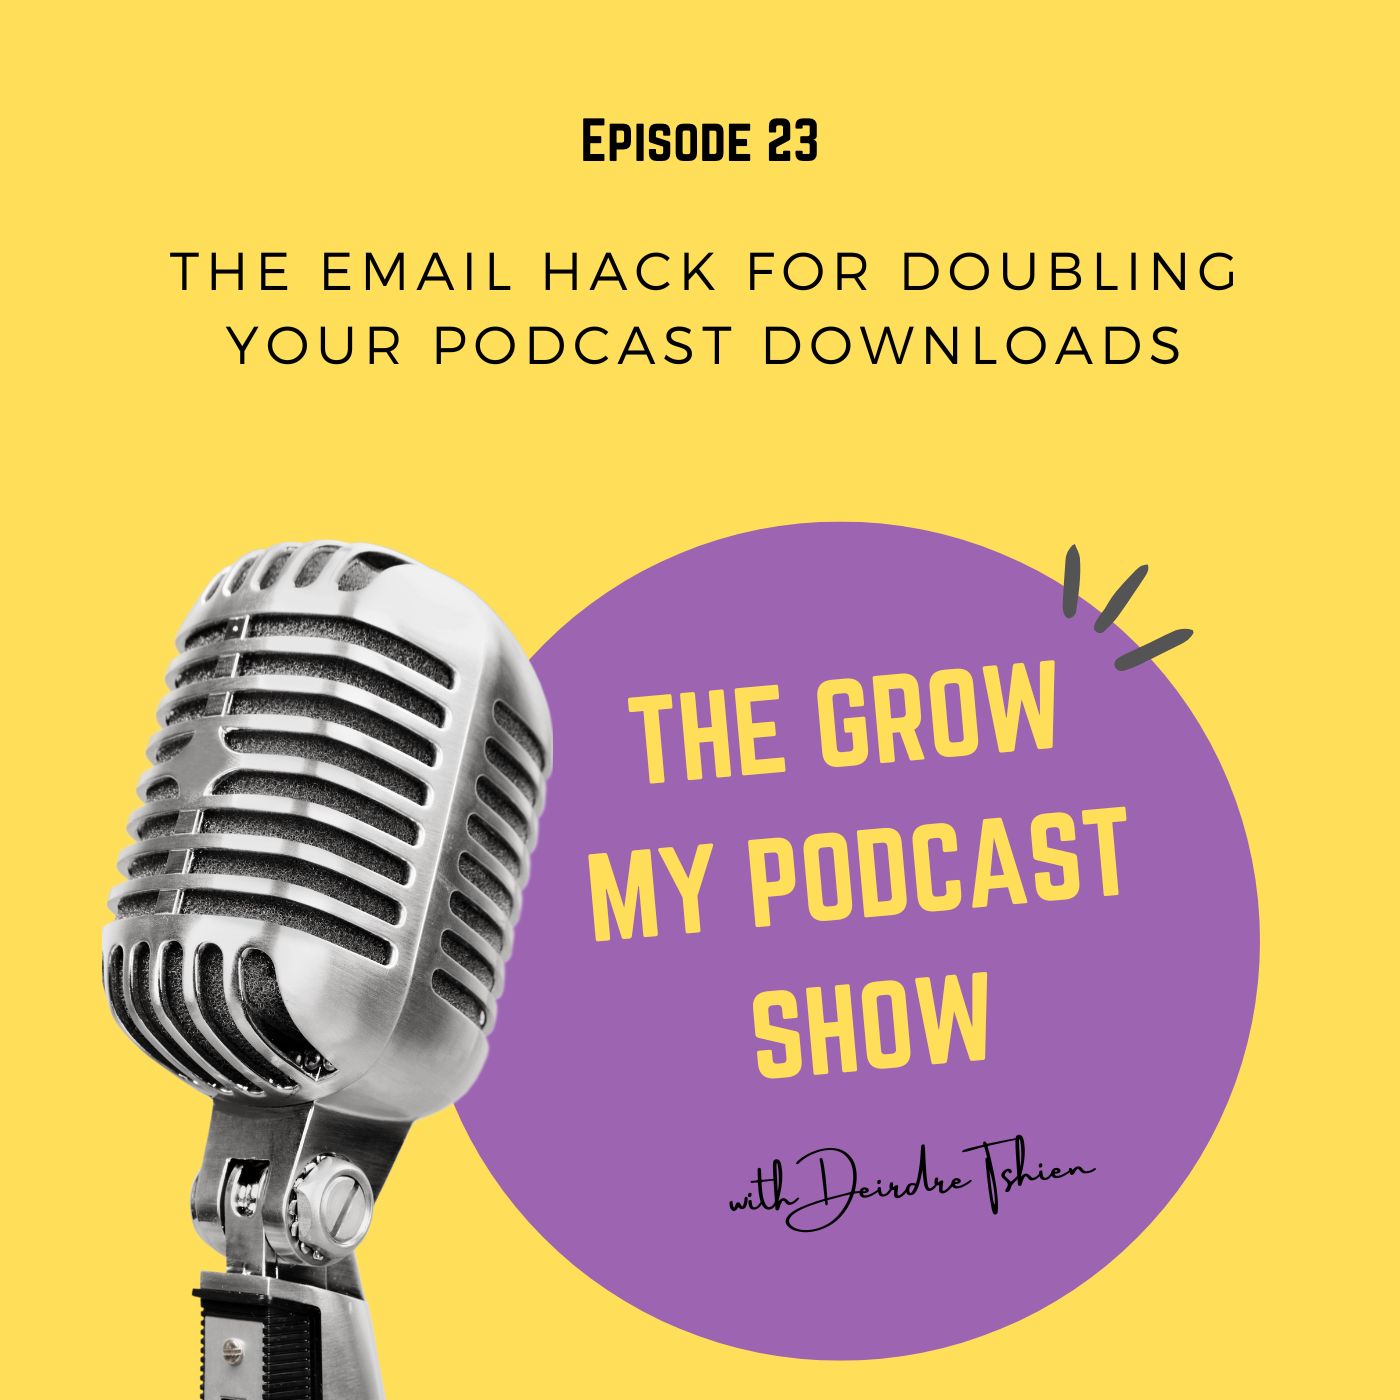 23. The Email Hack for Doubling Your Podcast Downloads Image